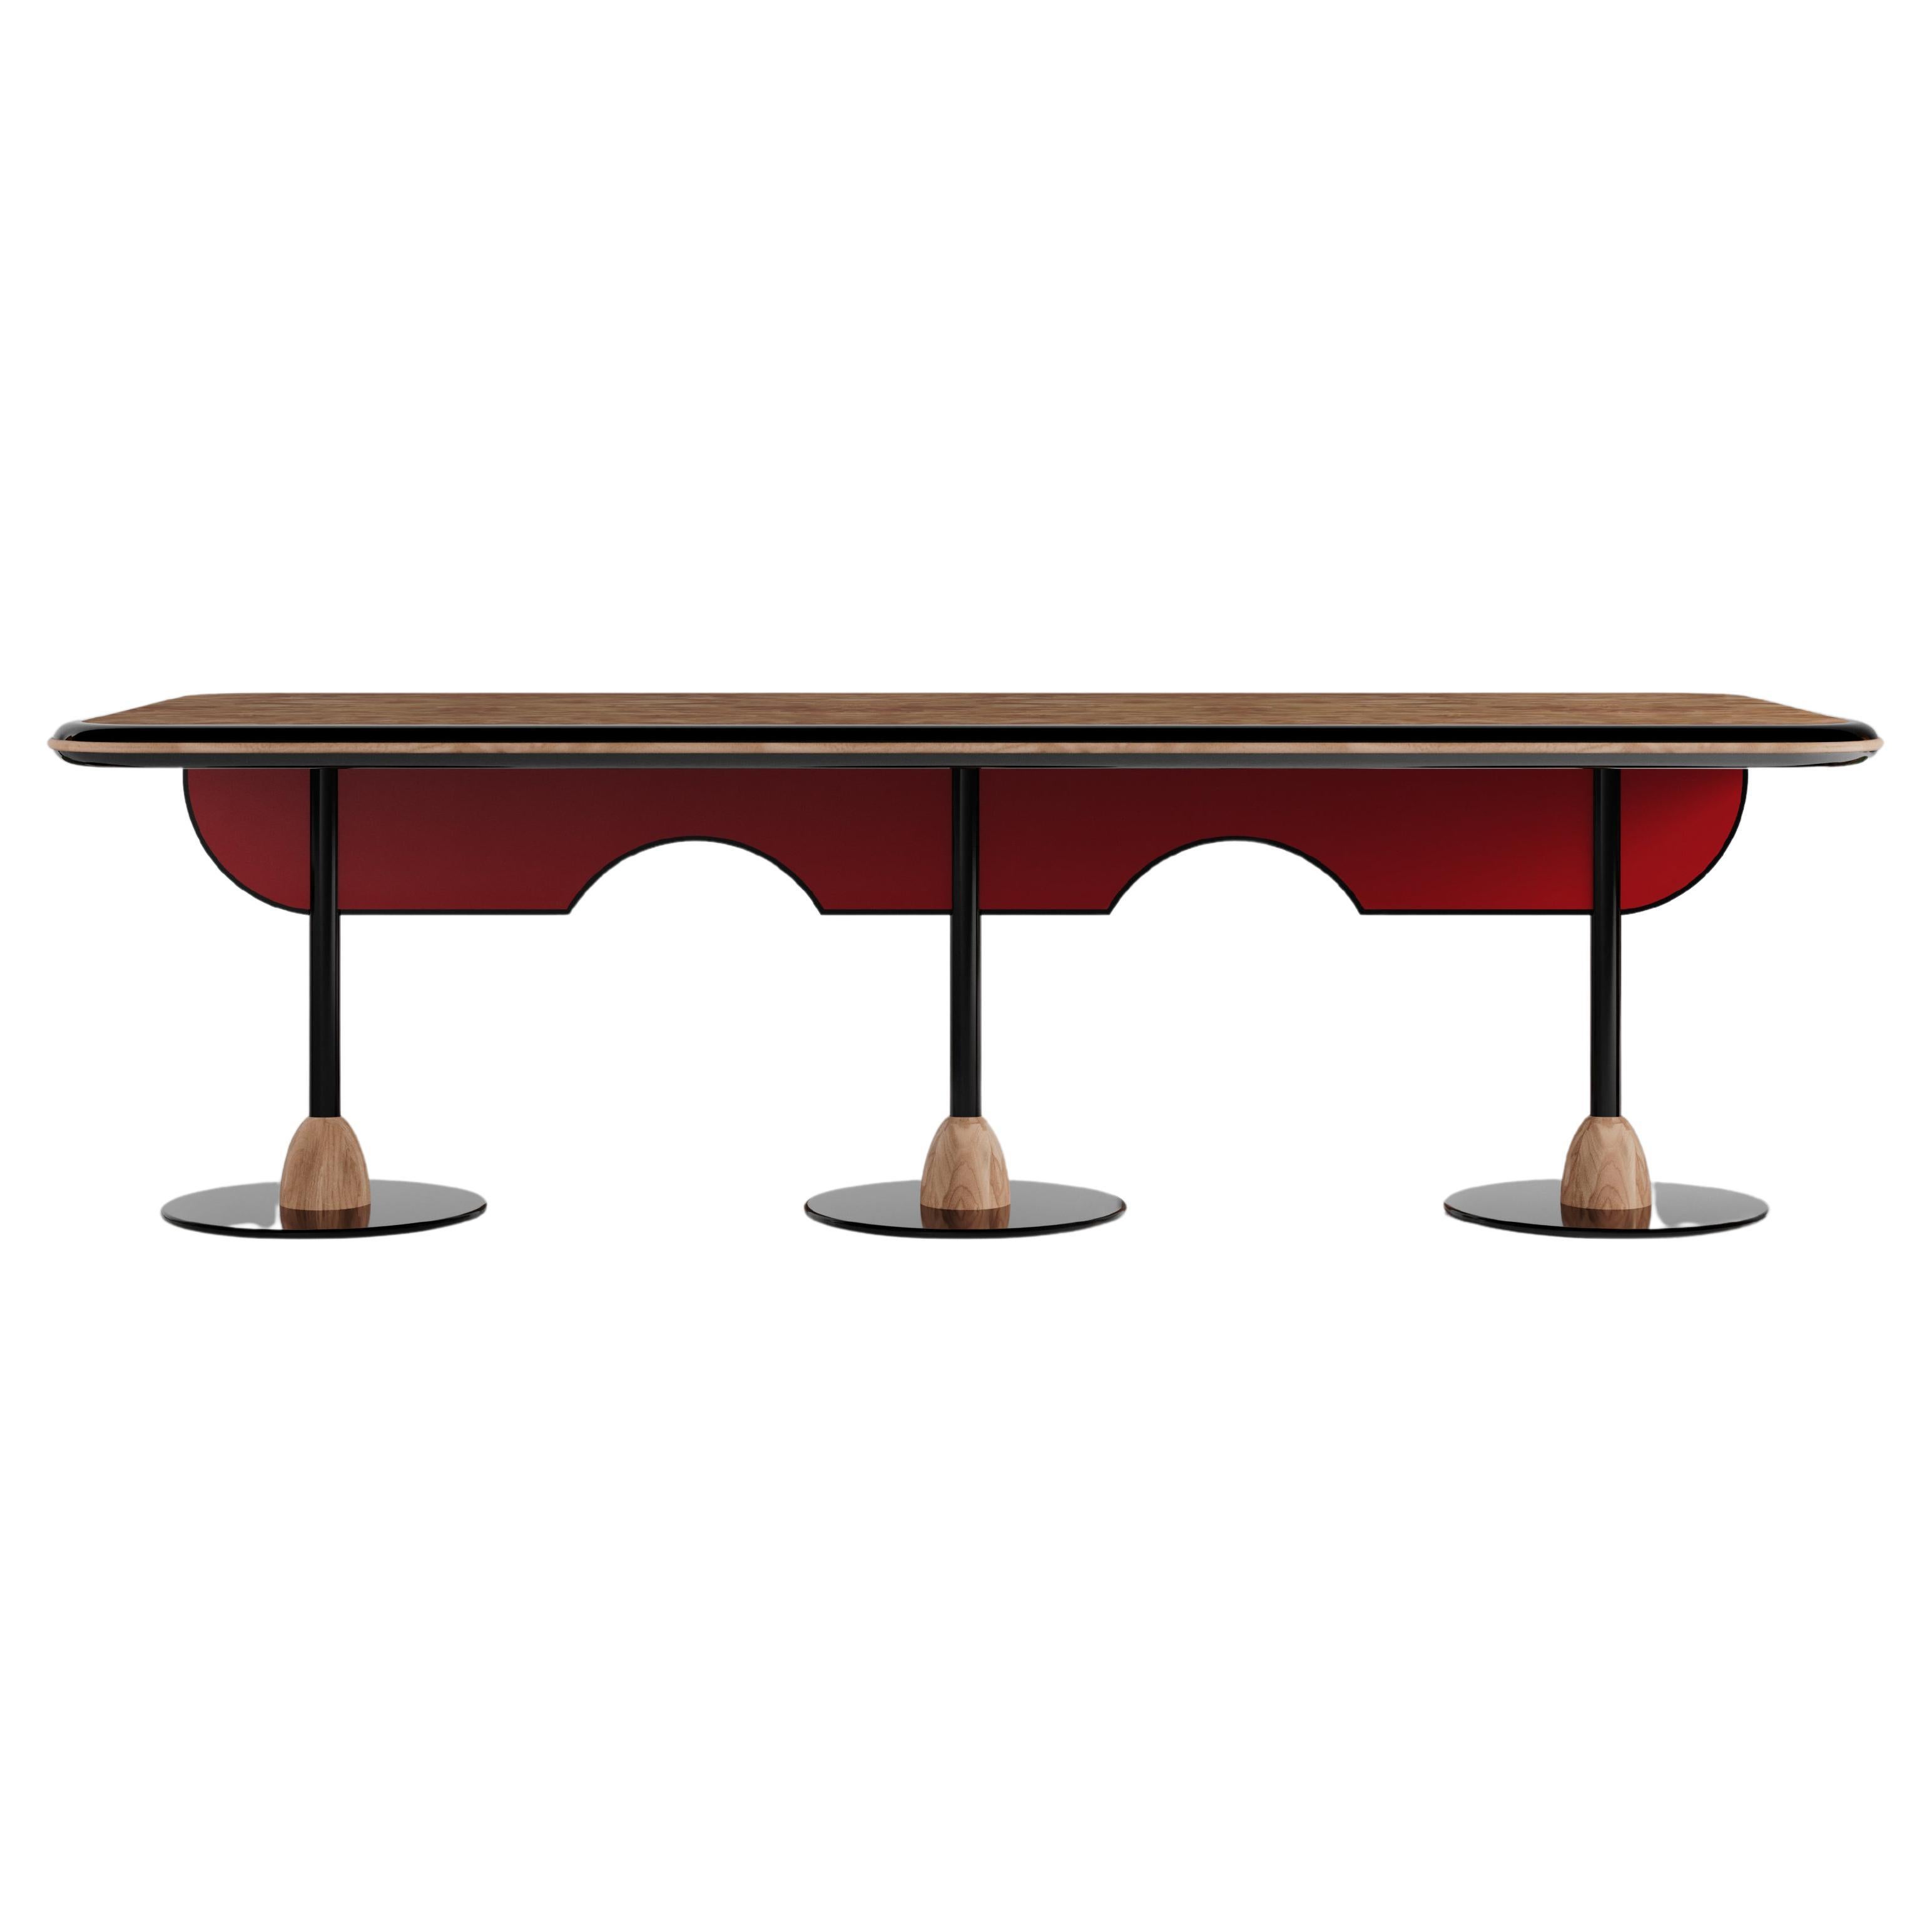 Contemporary Matias Sagaría Luxury Dining Table Root Wood Metal Base Red Fin For Sale